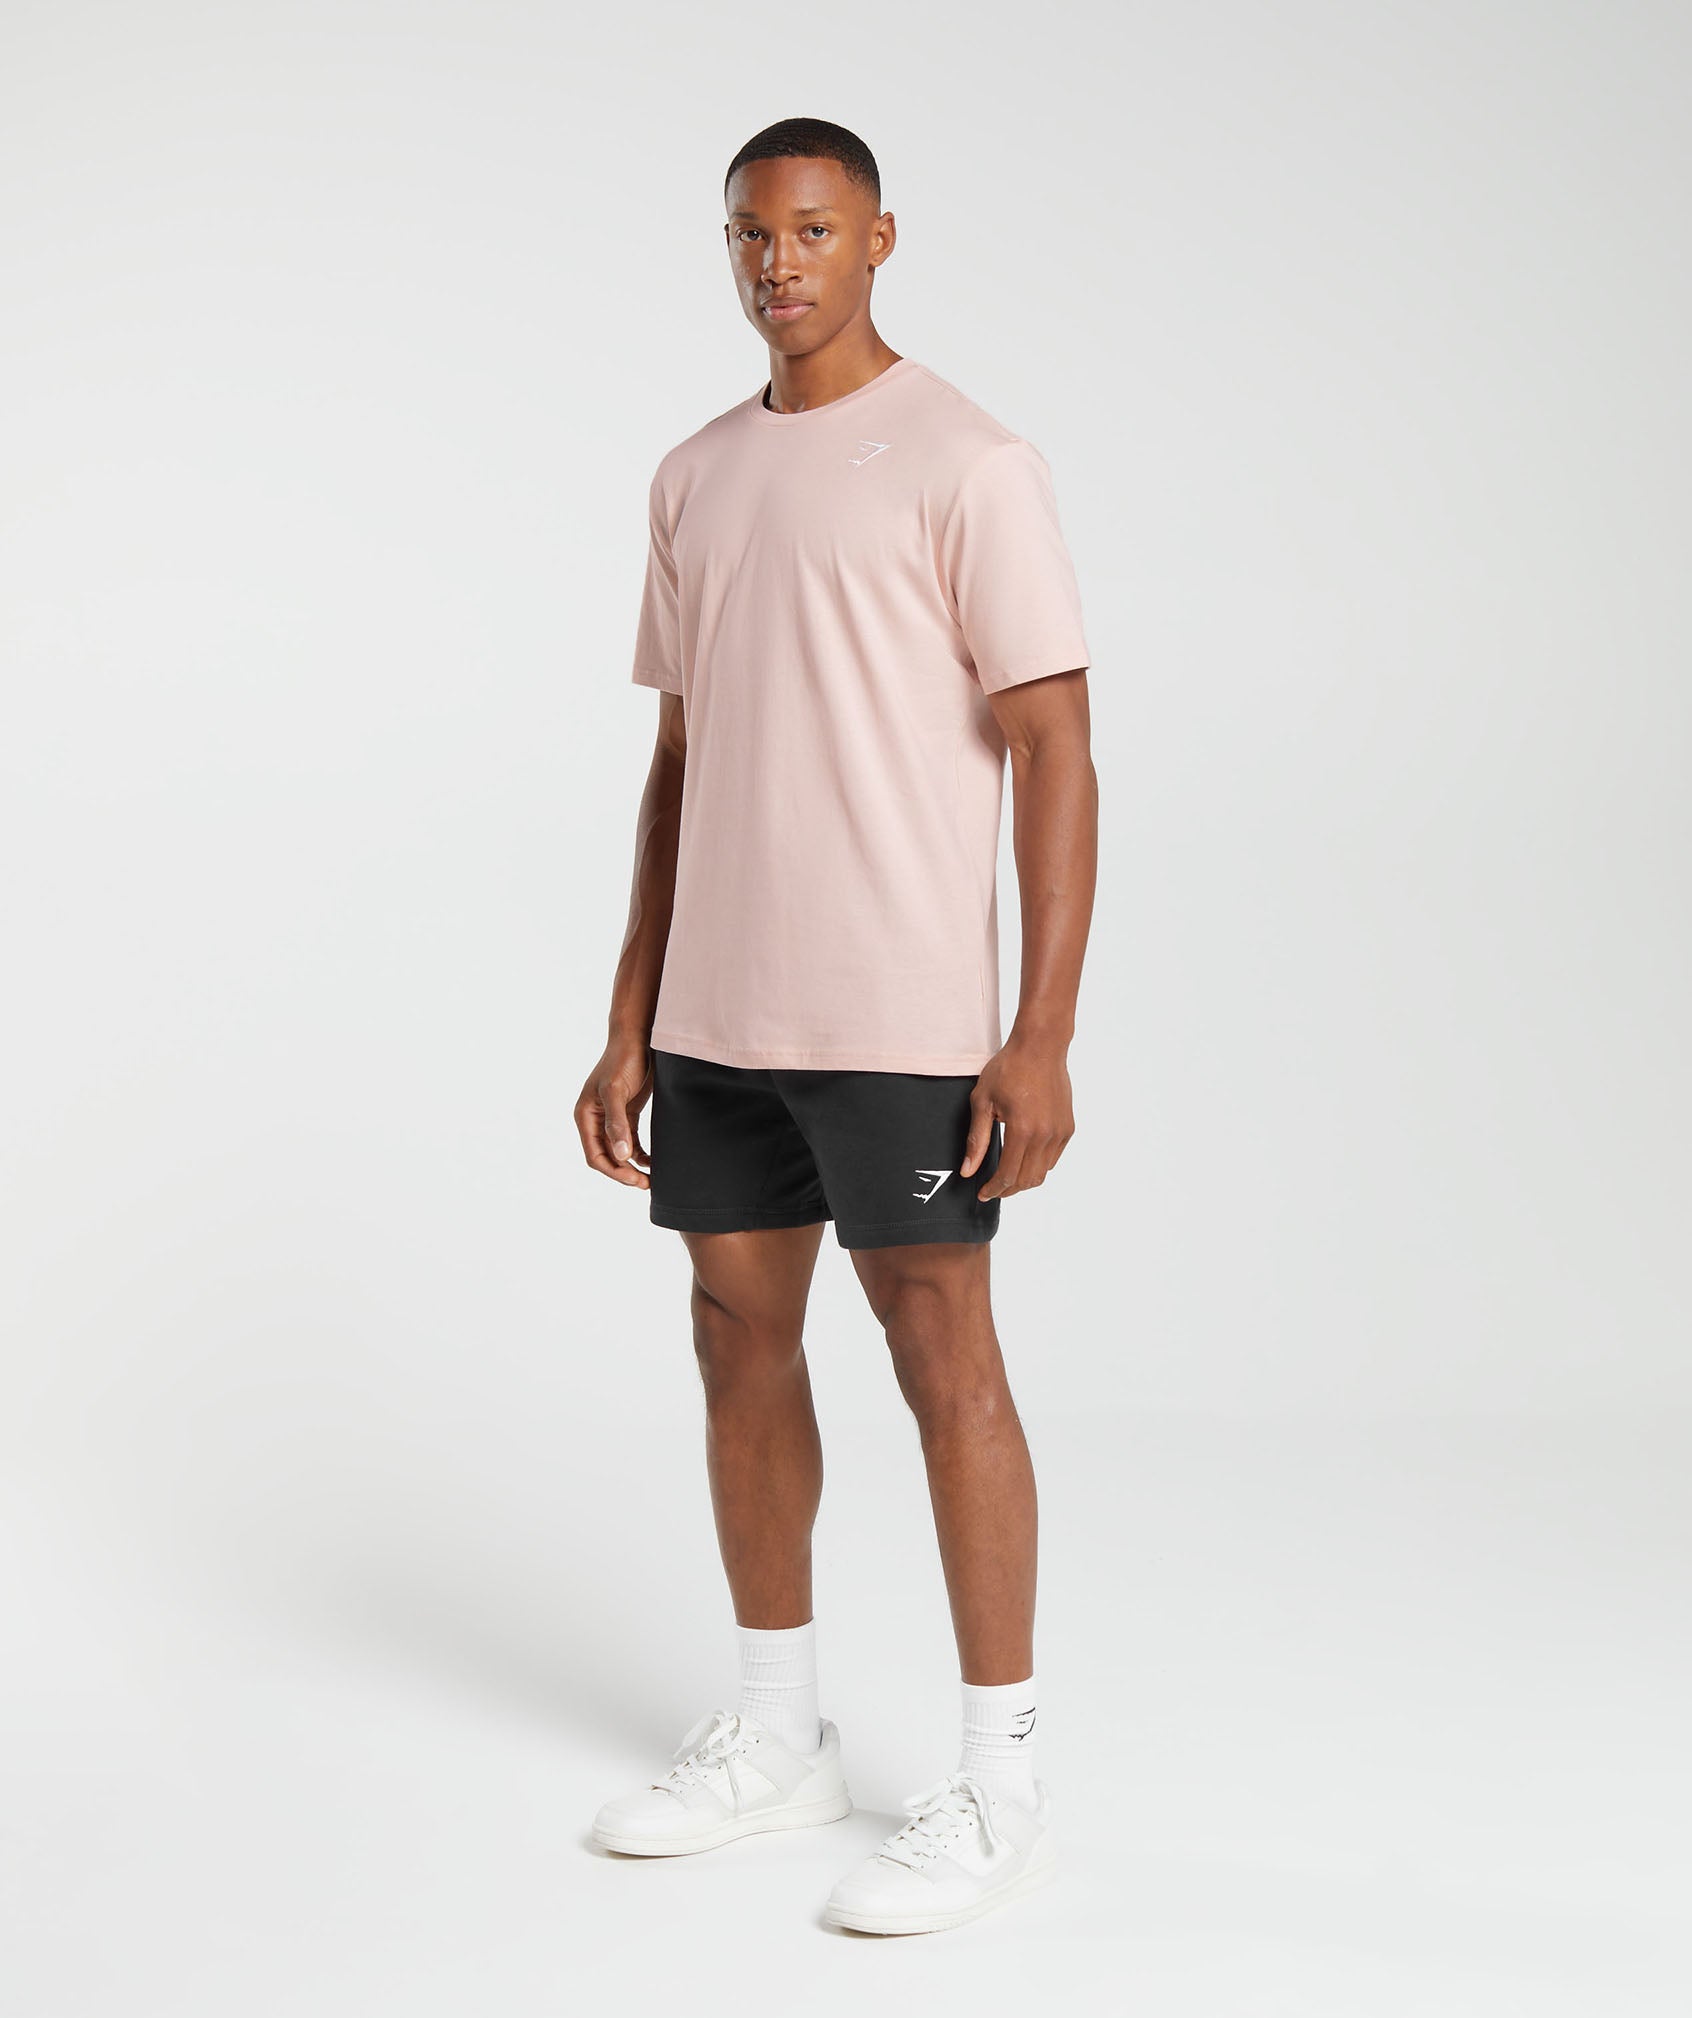 Crest T-Shirt in Misty Pink - view 4